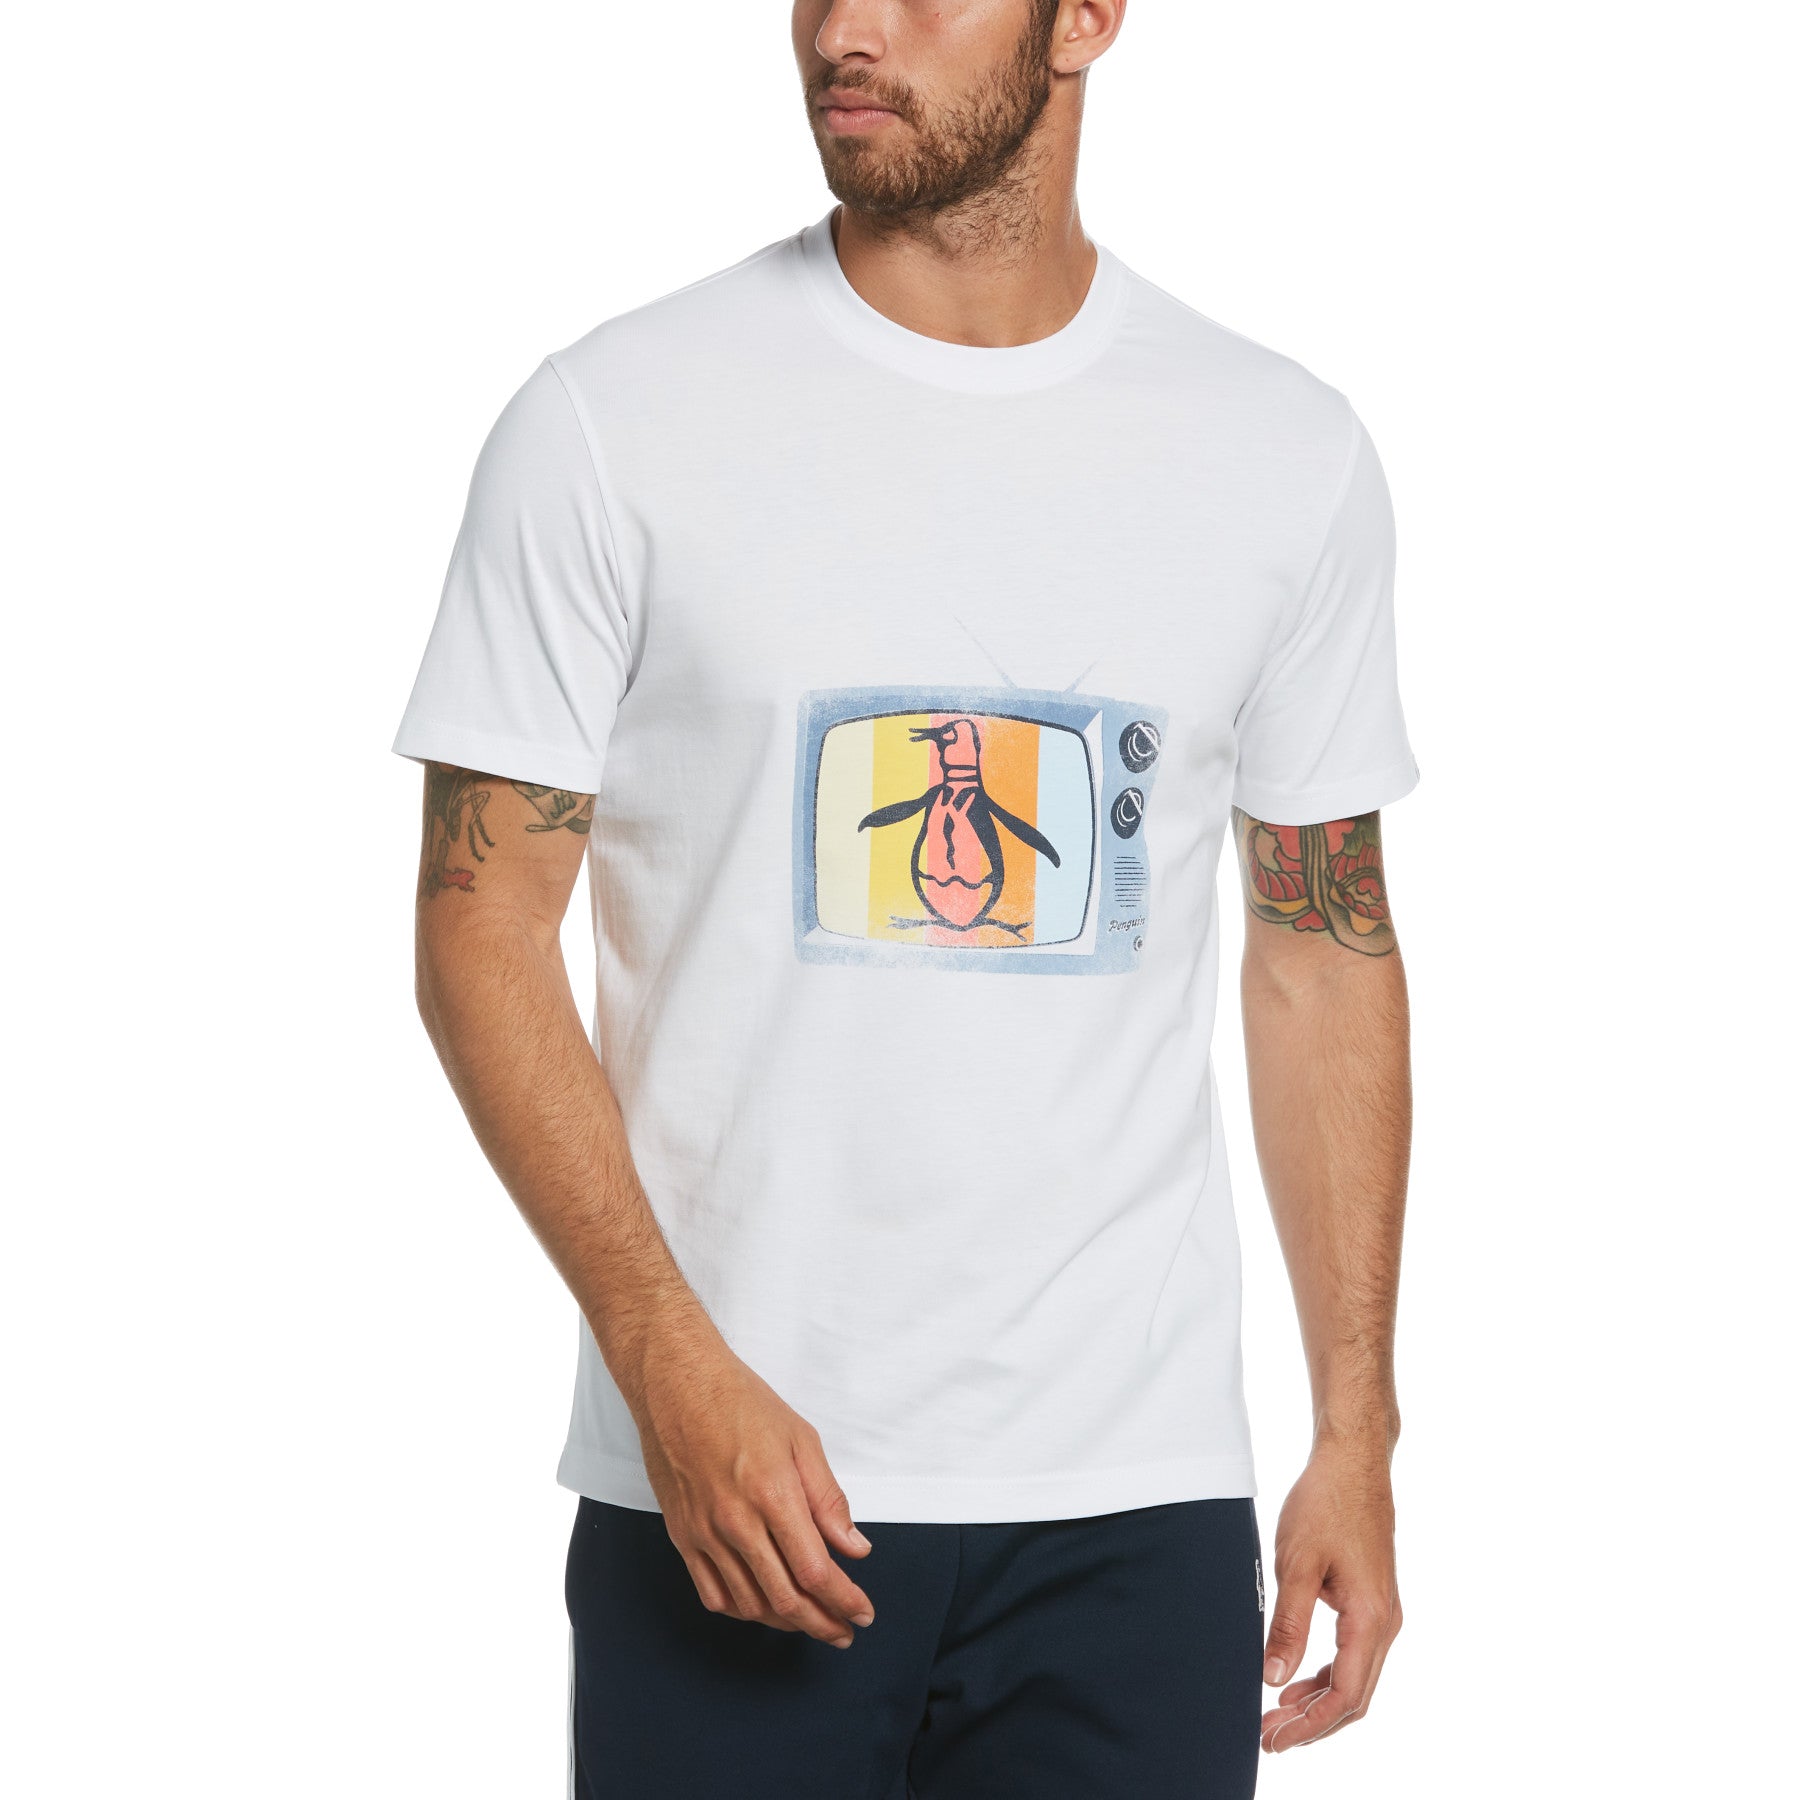 View Pete TV TShirt In Bright White information